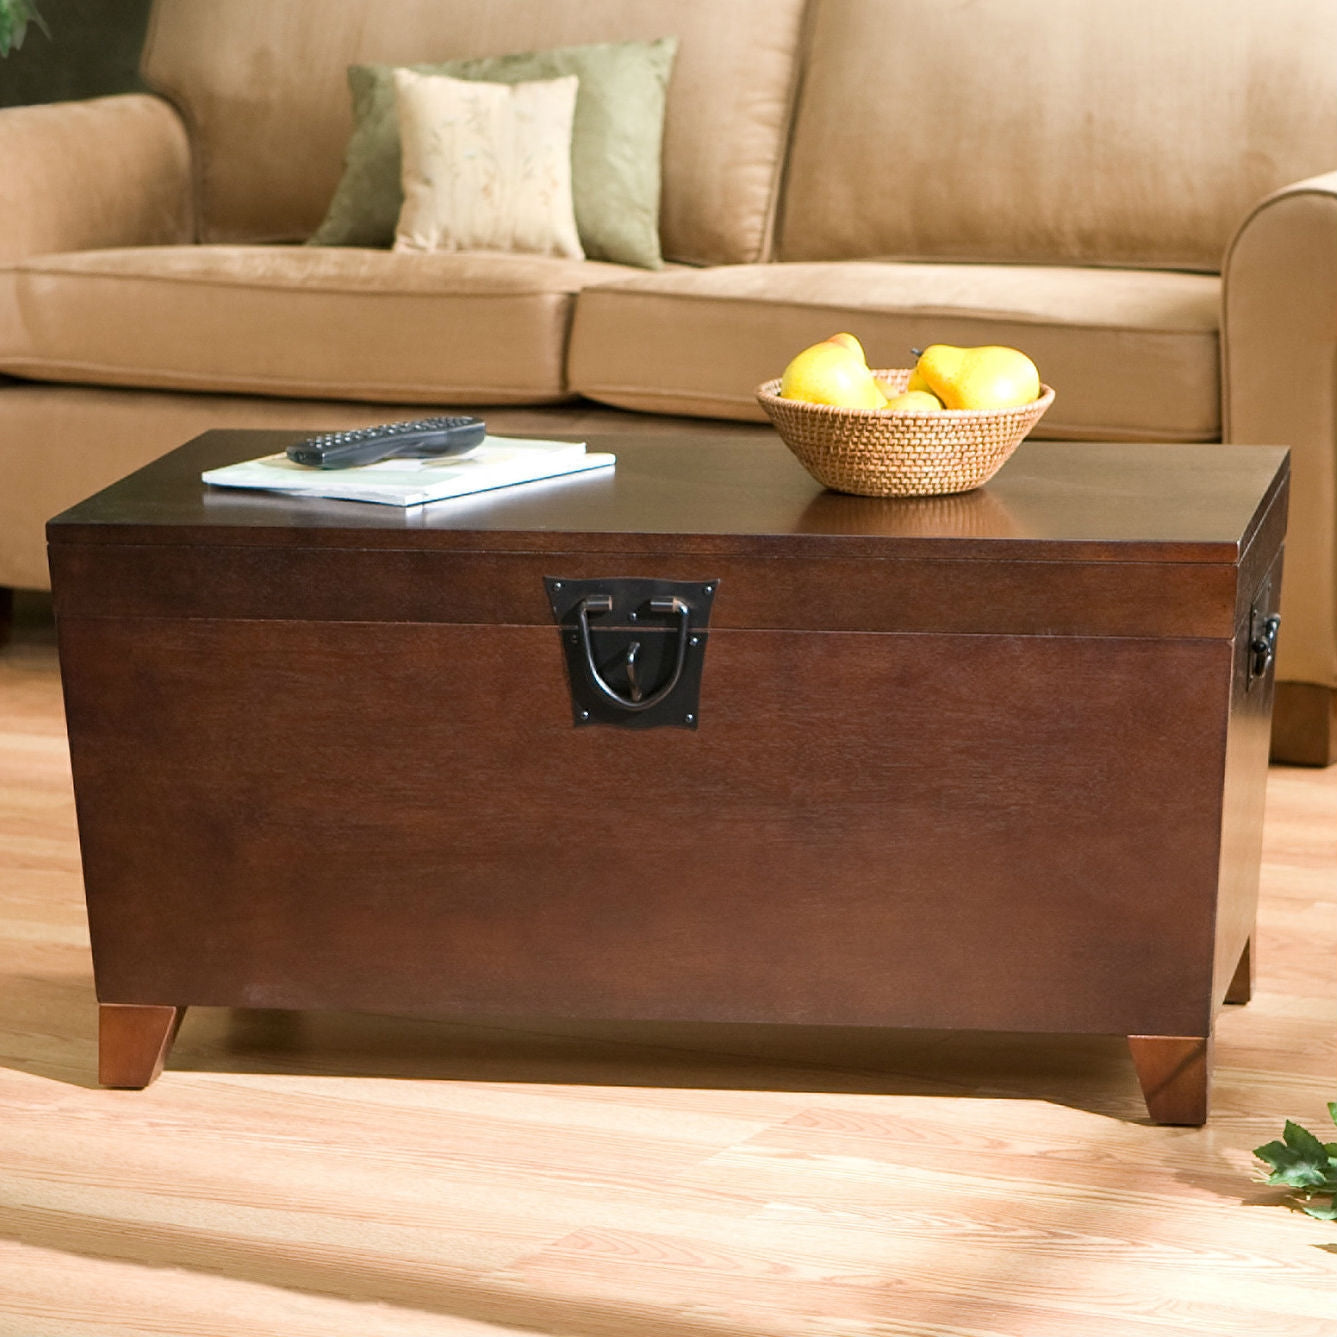 Living Room > Coffee Tables - Contemporary Lift Top Coffee Table Storage Trunk In Espresso Finish